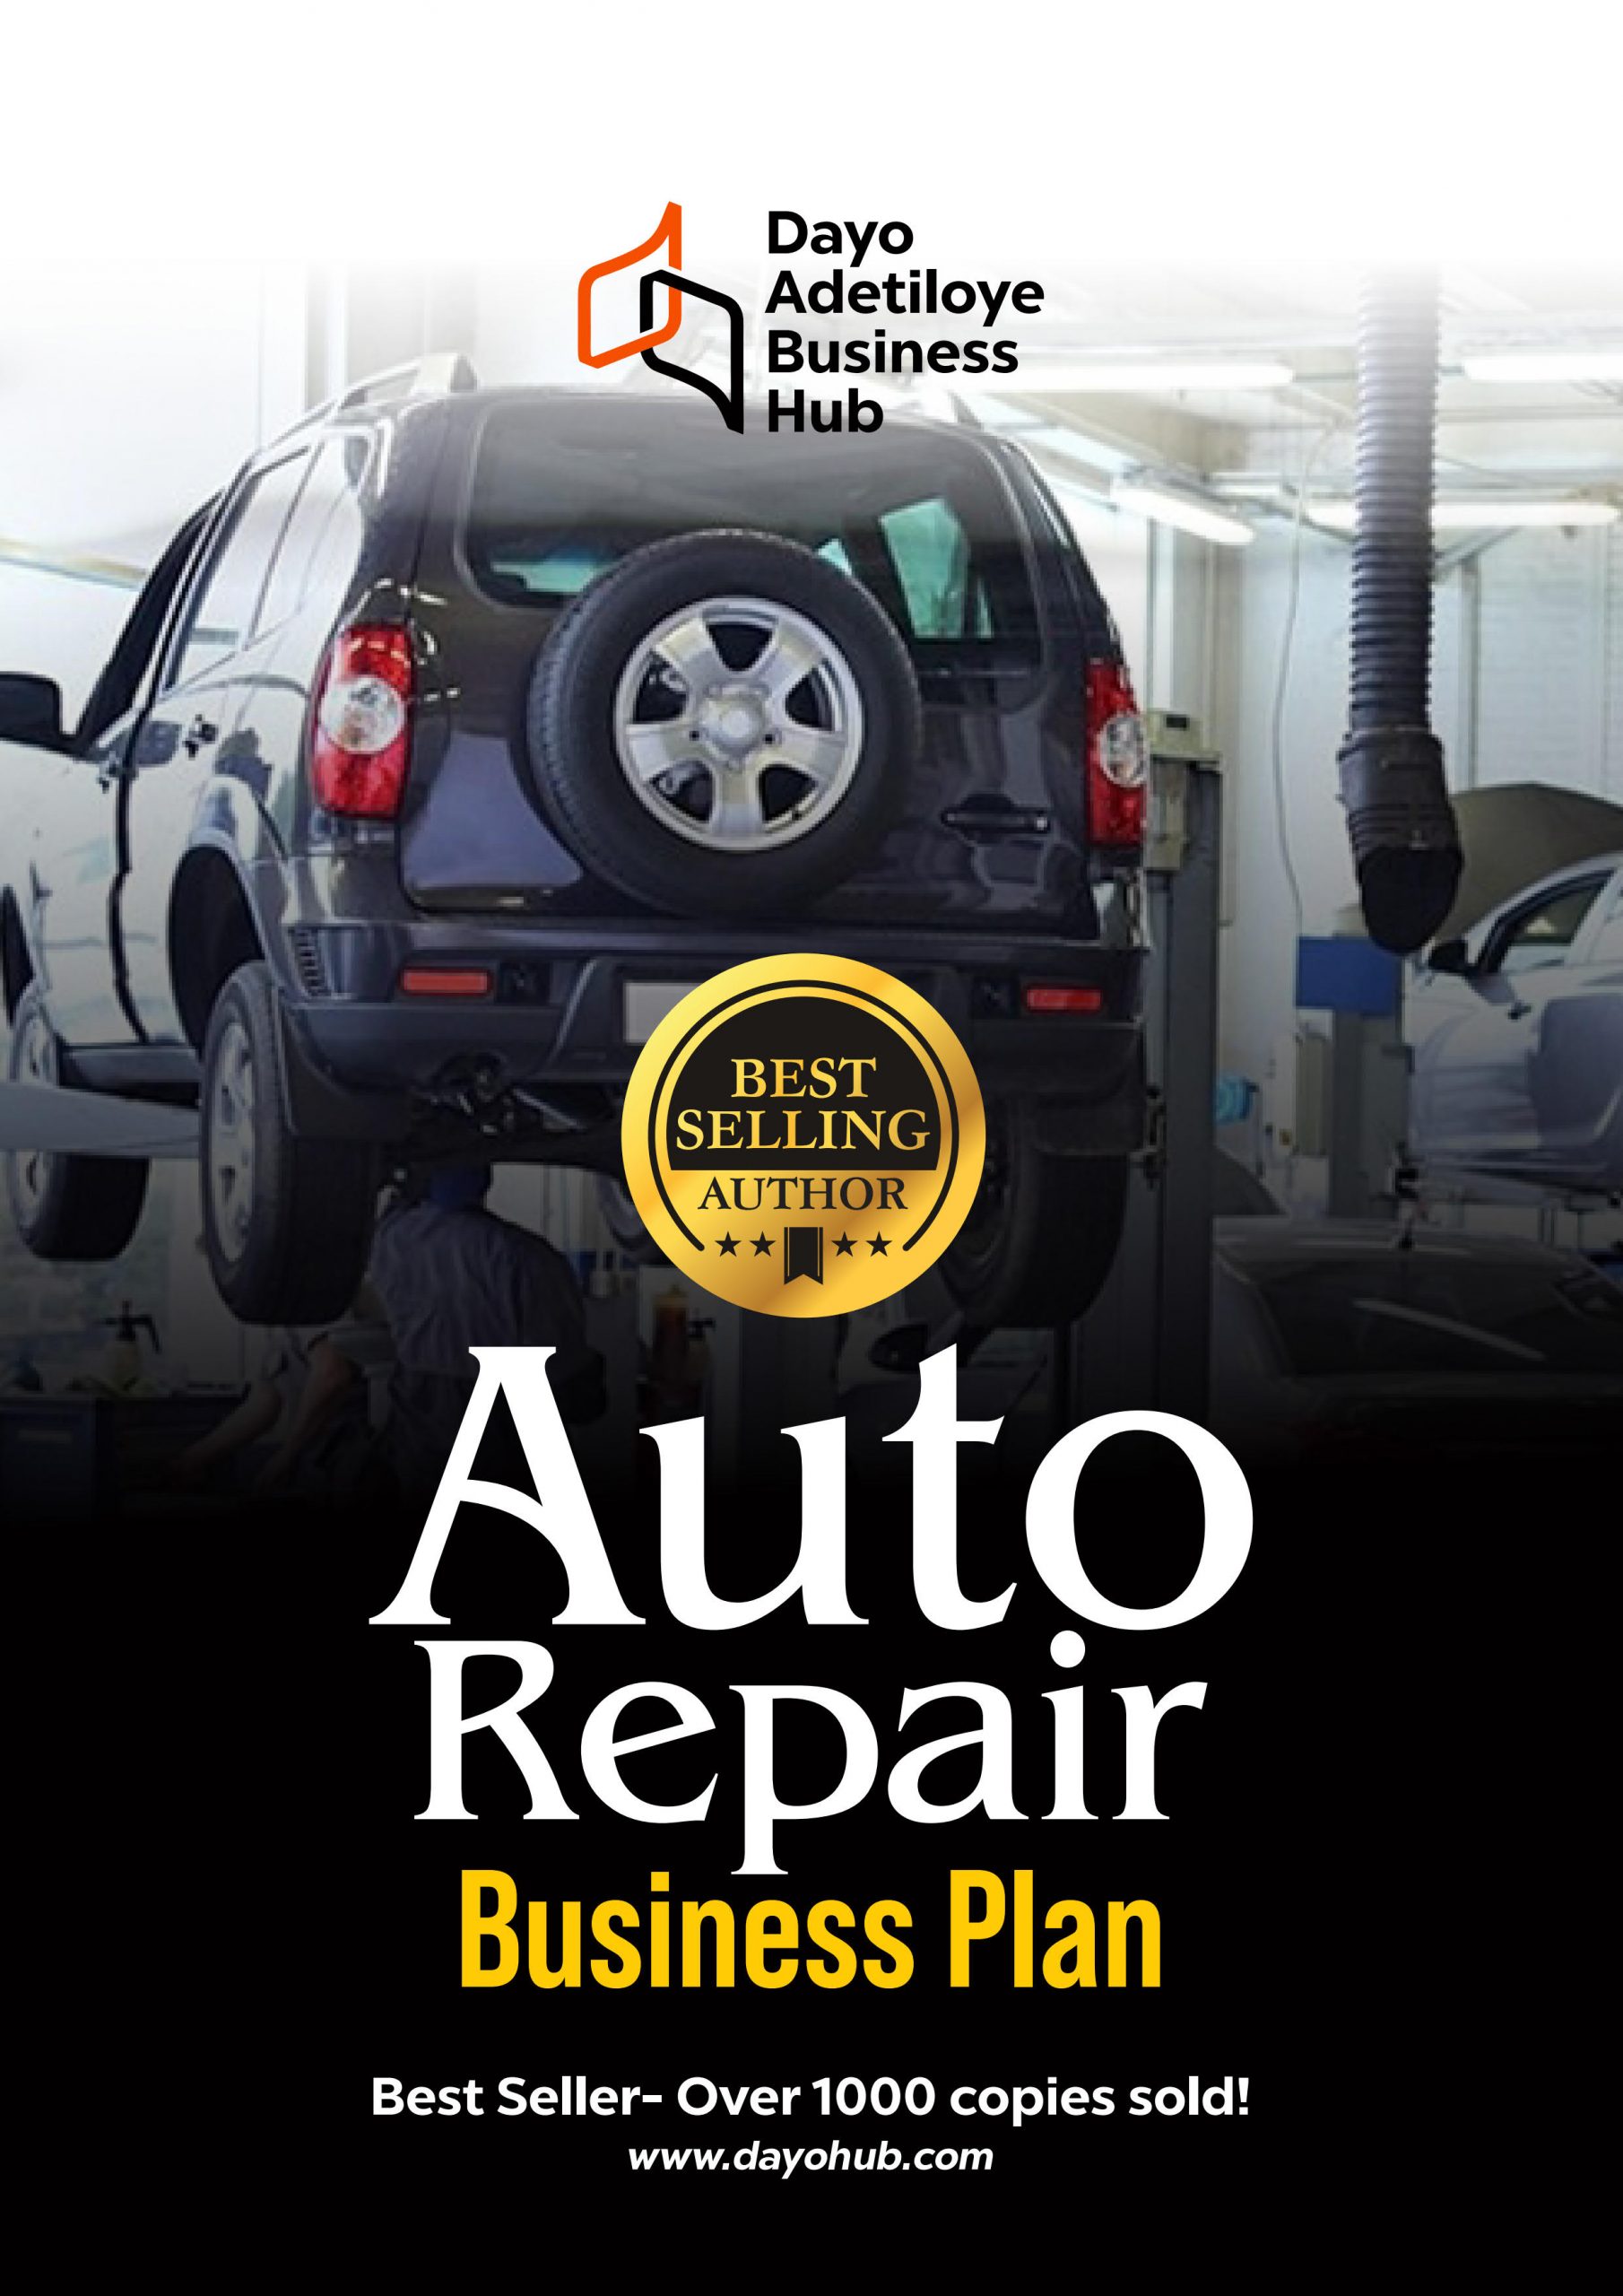 auto upholstery business plan